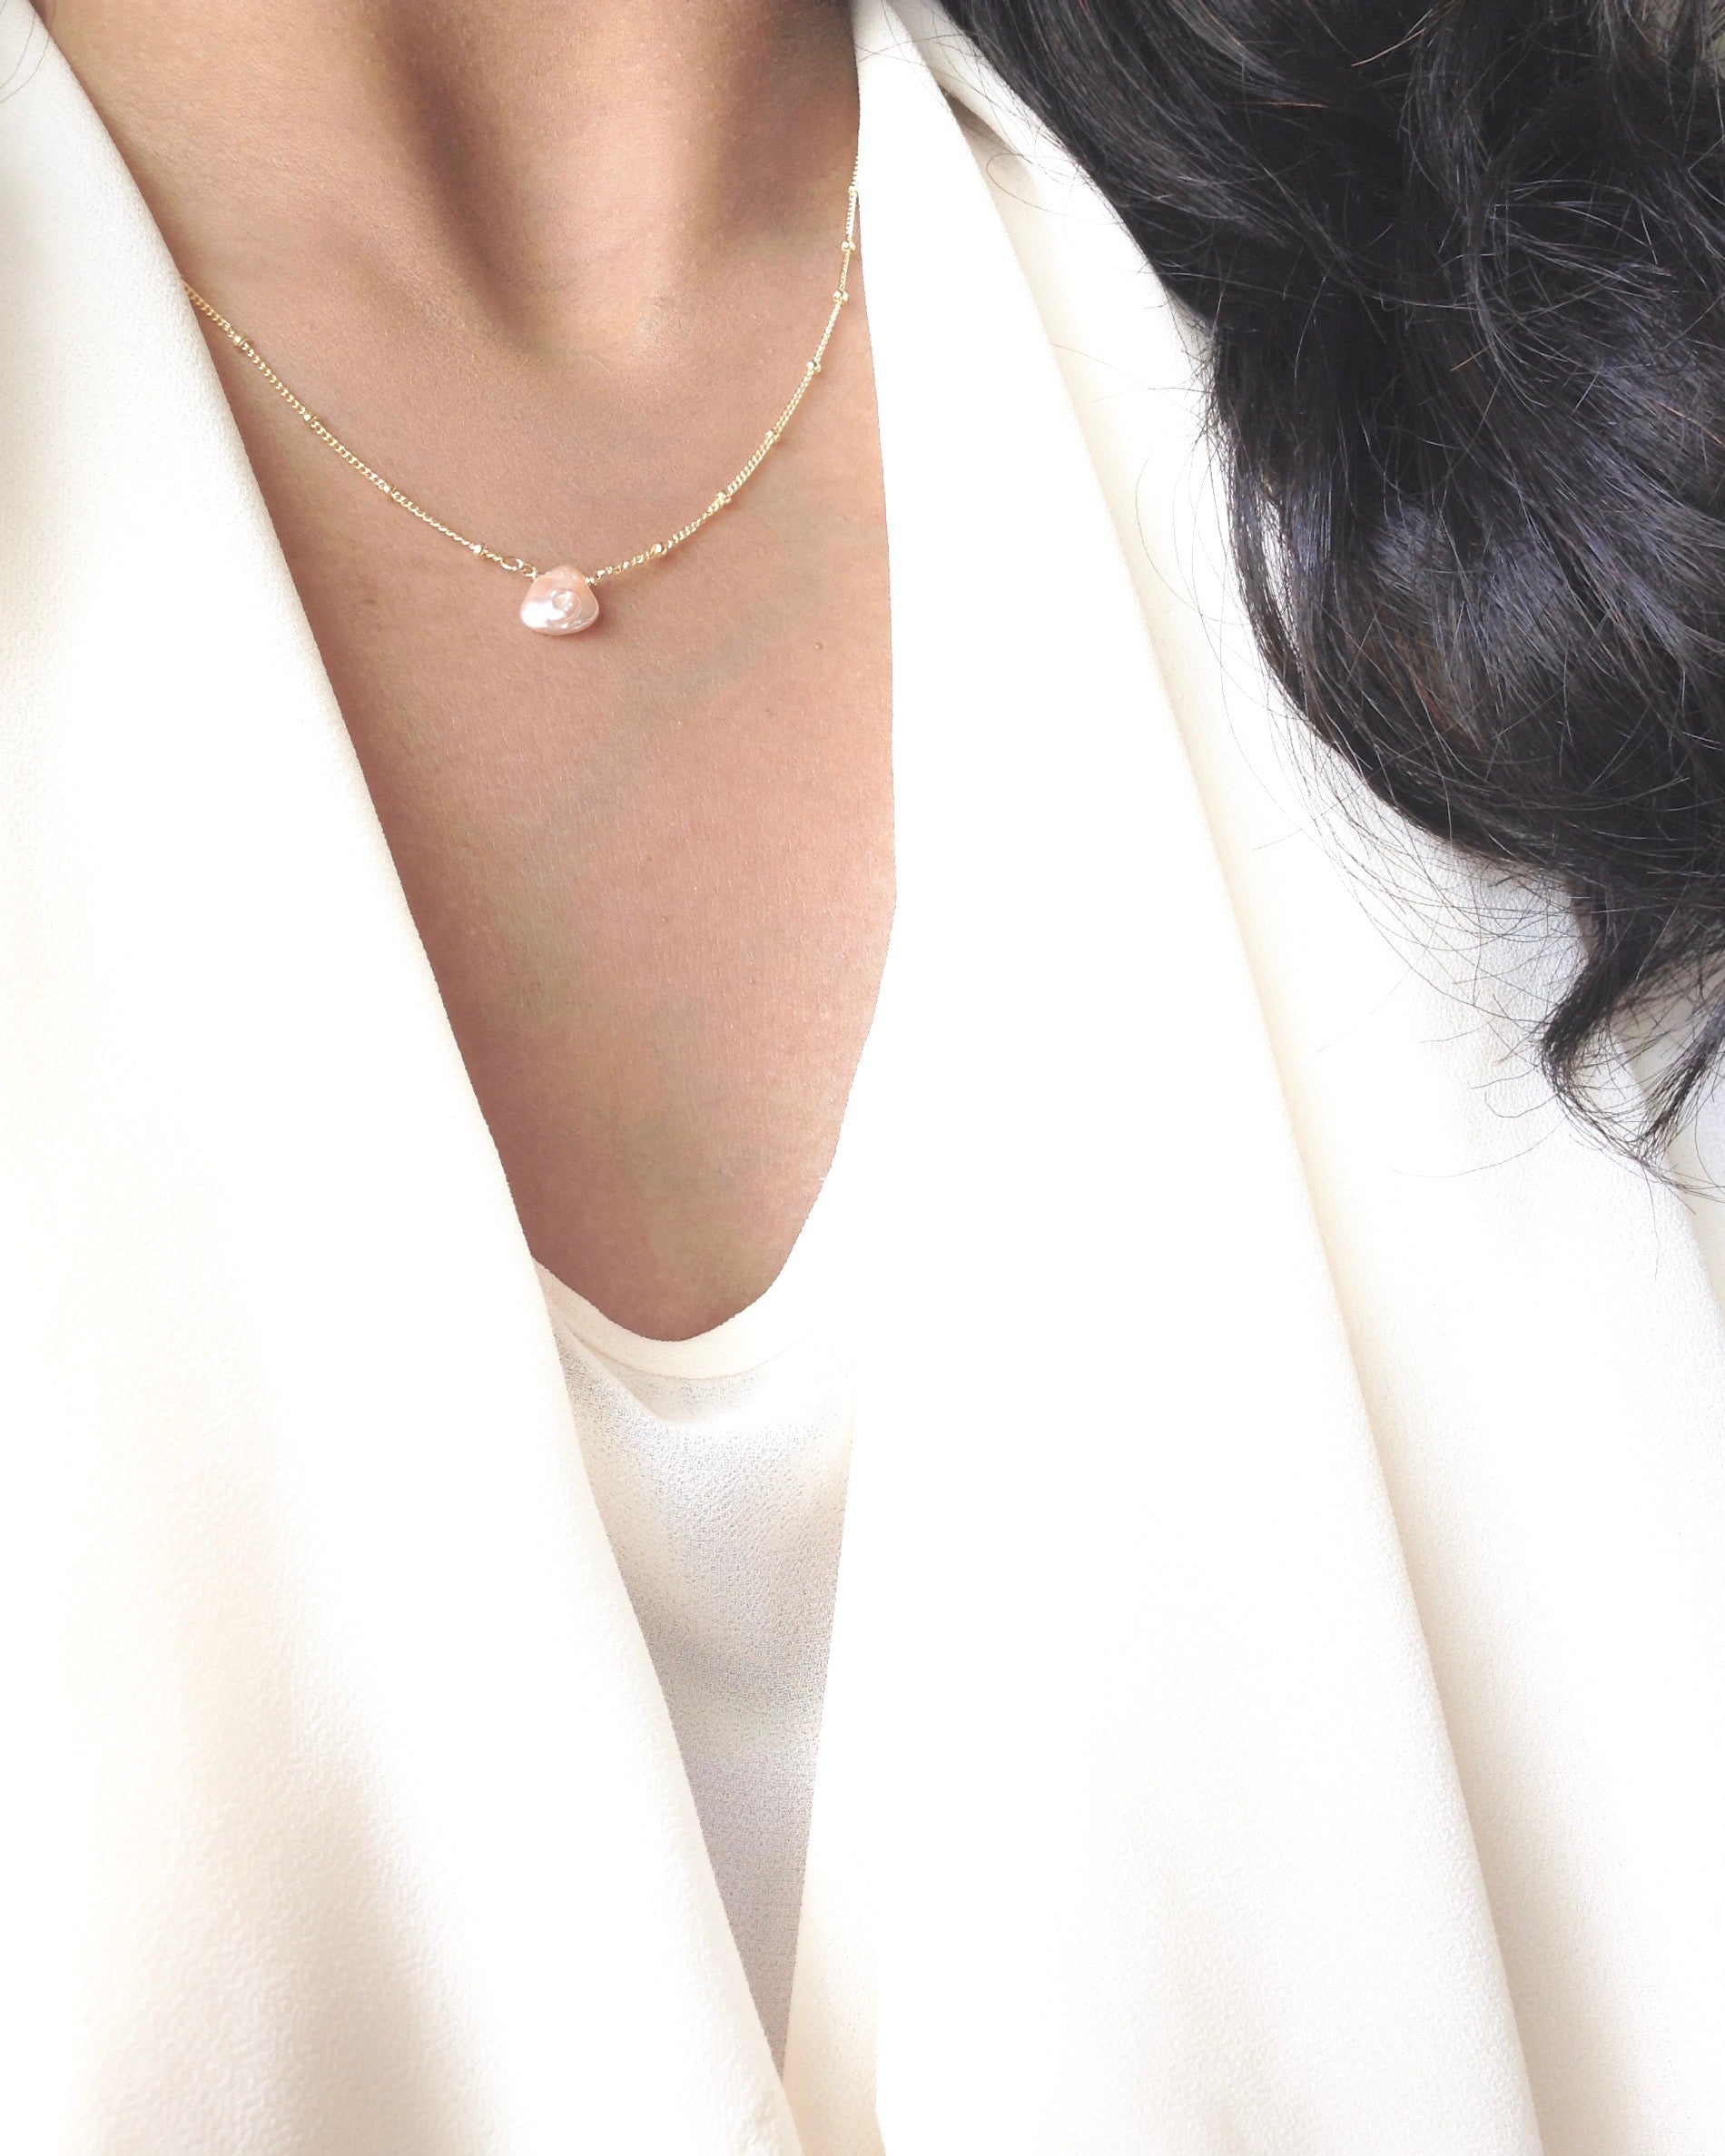 Minimal Keshi Pearl Necklace in Gold Filled or Sterling Silver | IB Jewelry